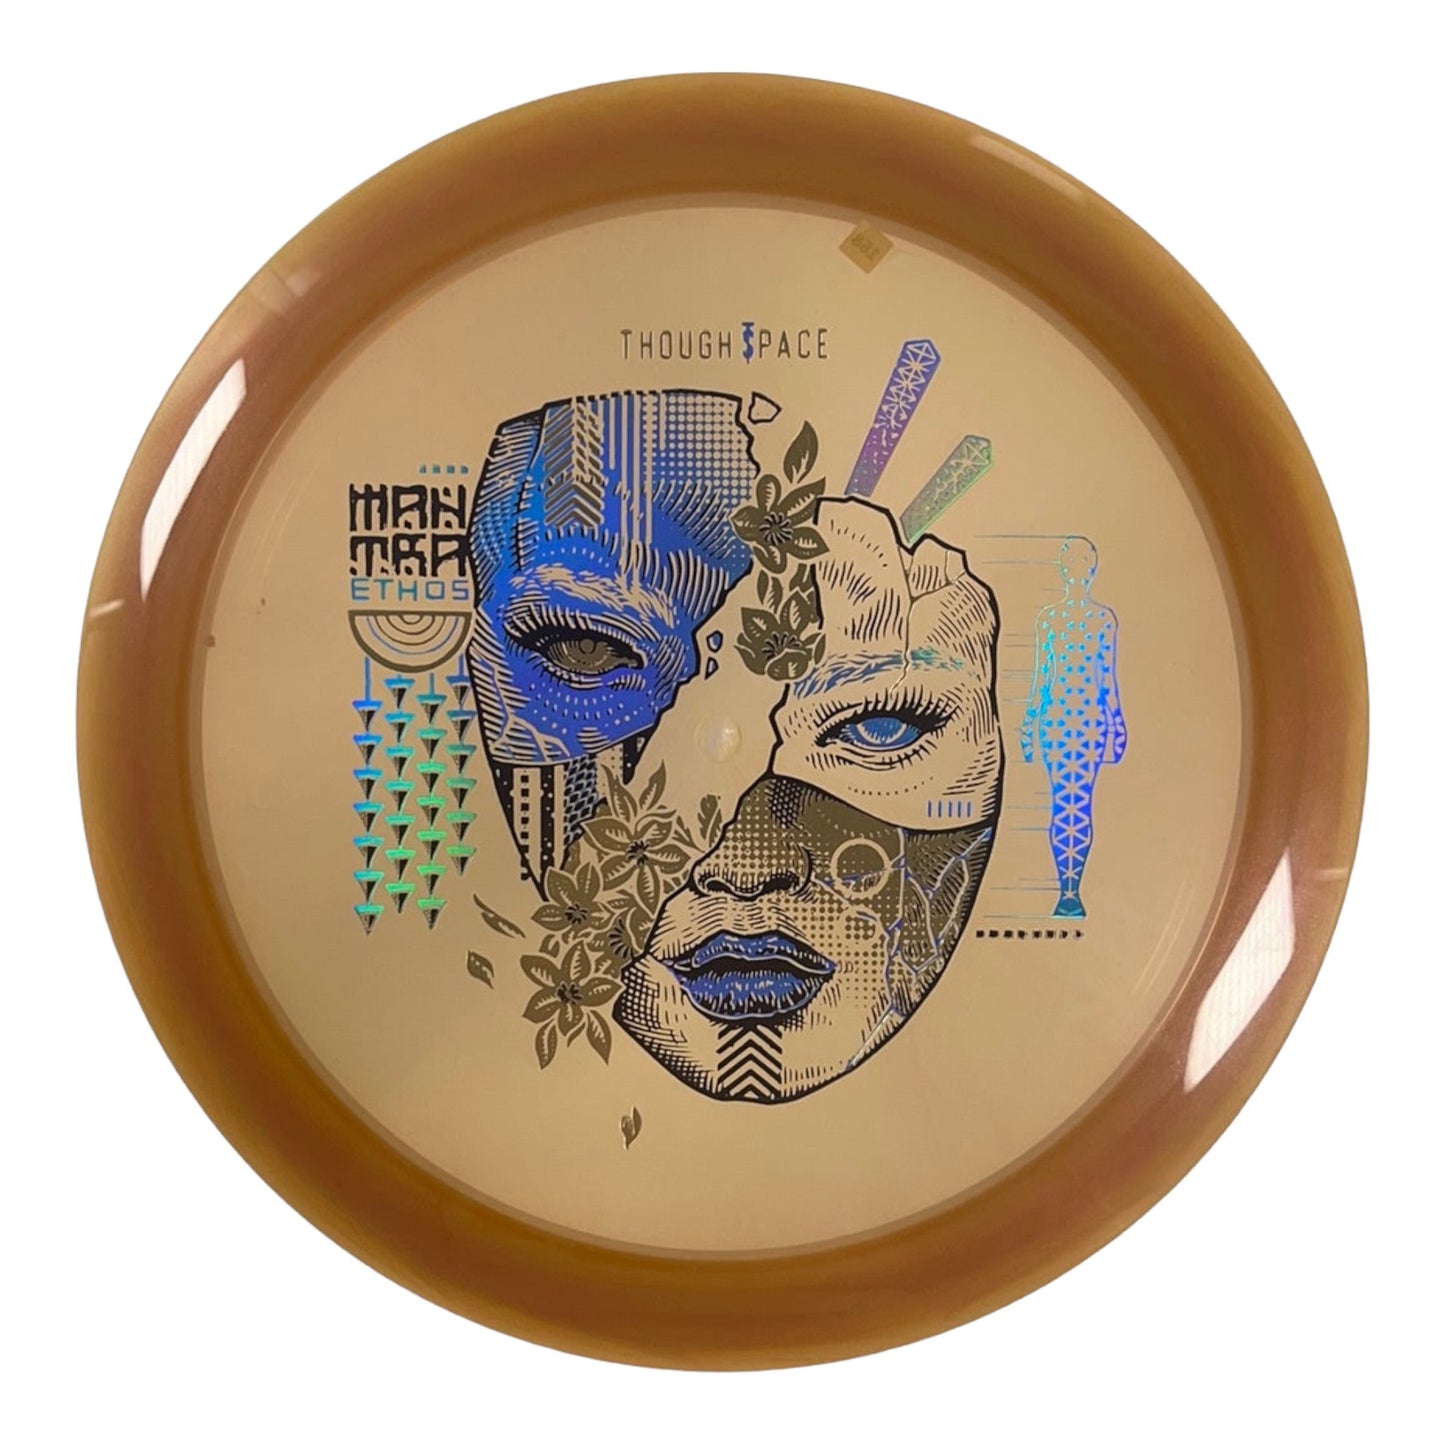 Thought Space Athletics Mantra | Ethos | Tan/Blue Holo 168g Disc Golf